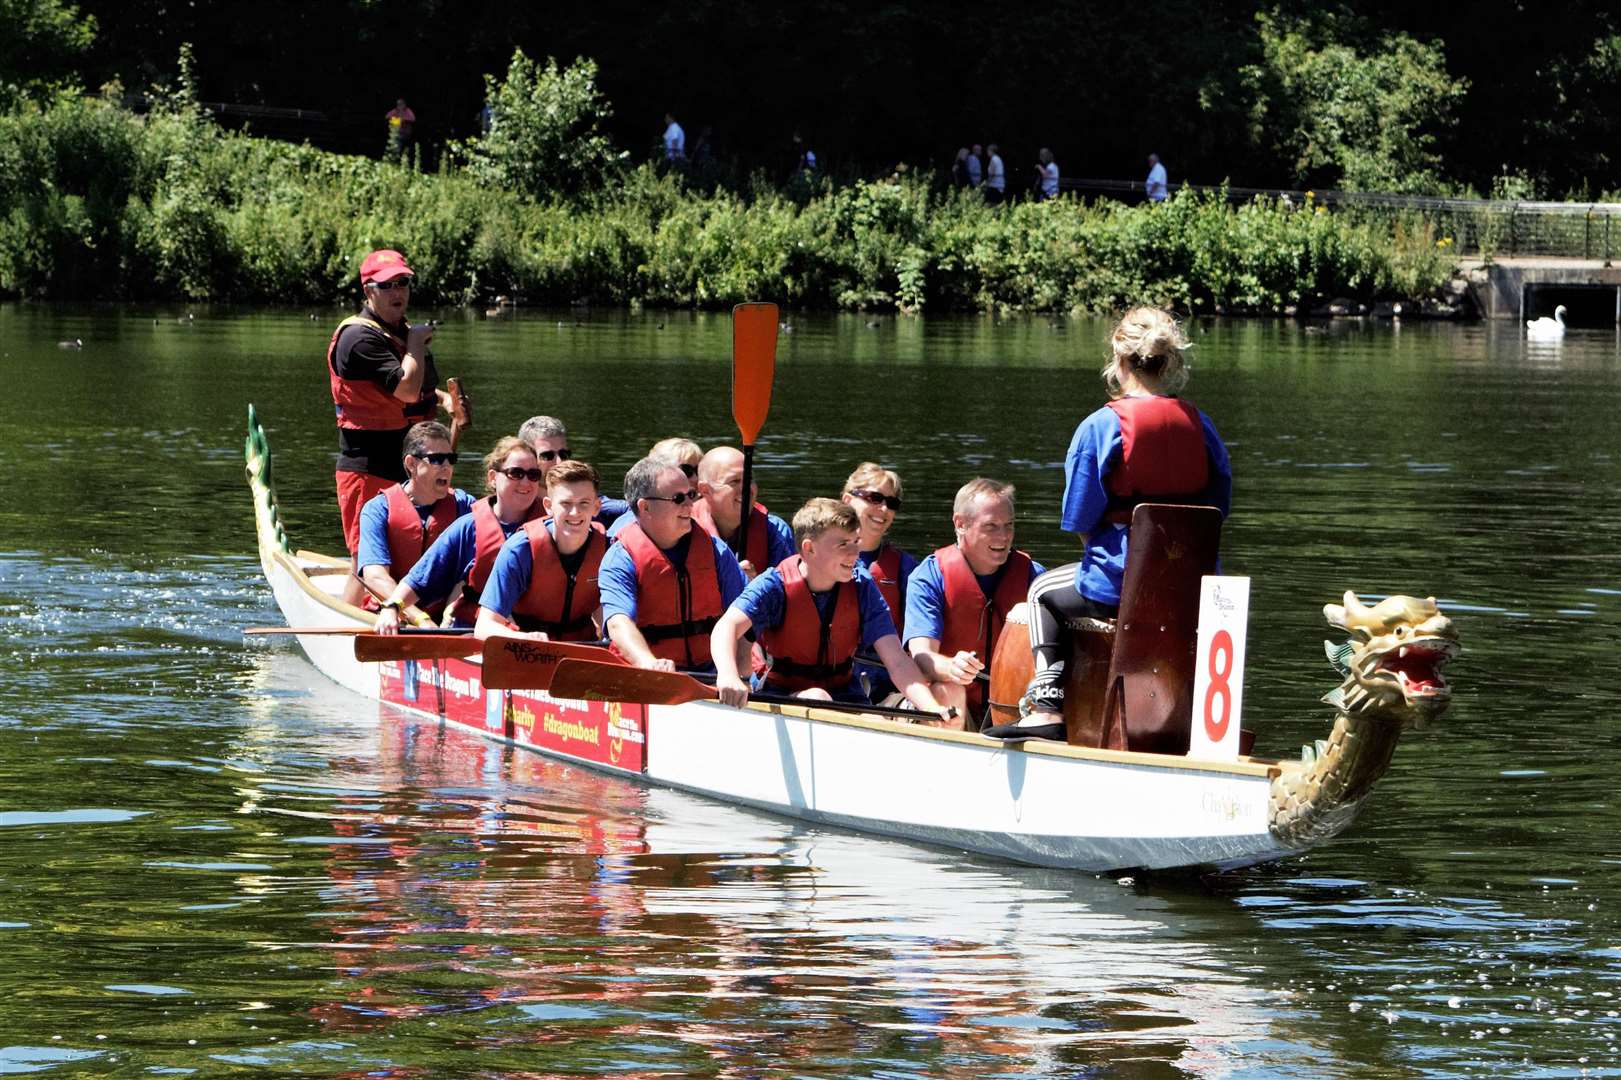 The Guide Dogs Medway team taking part in the Dragon Boat race